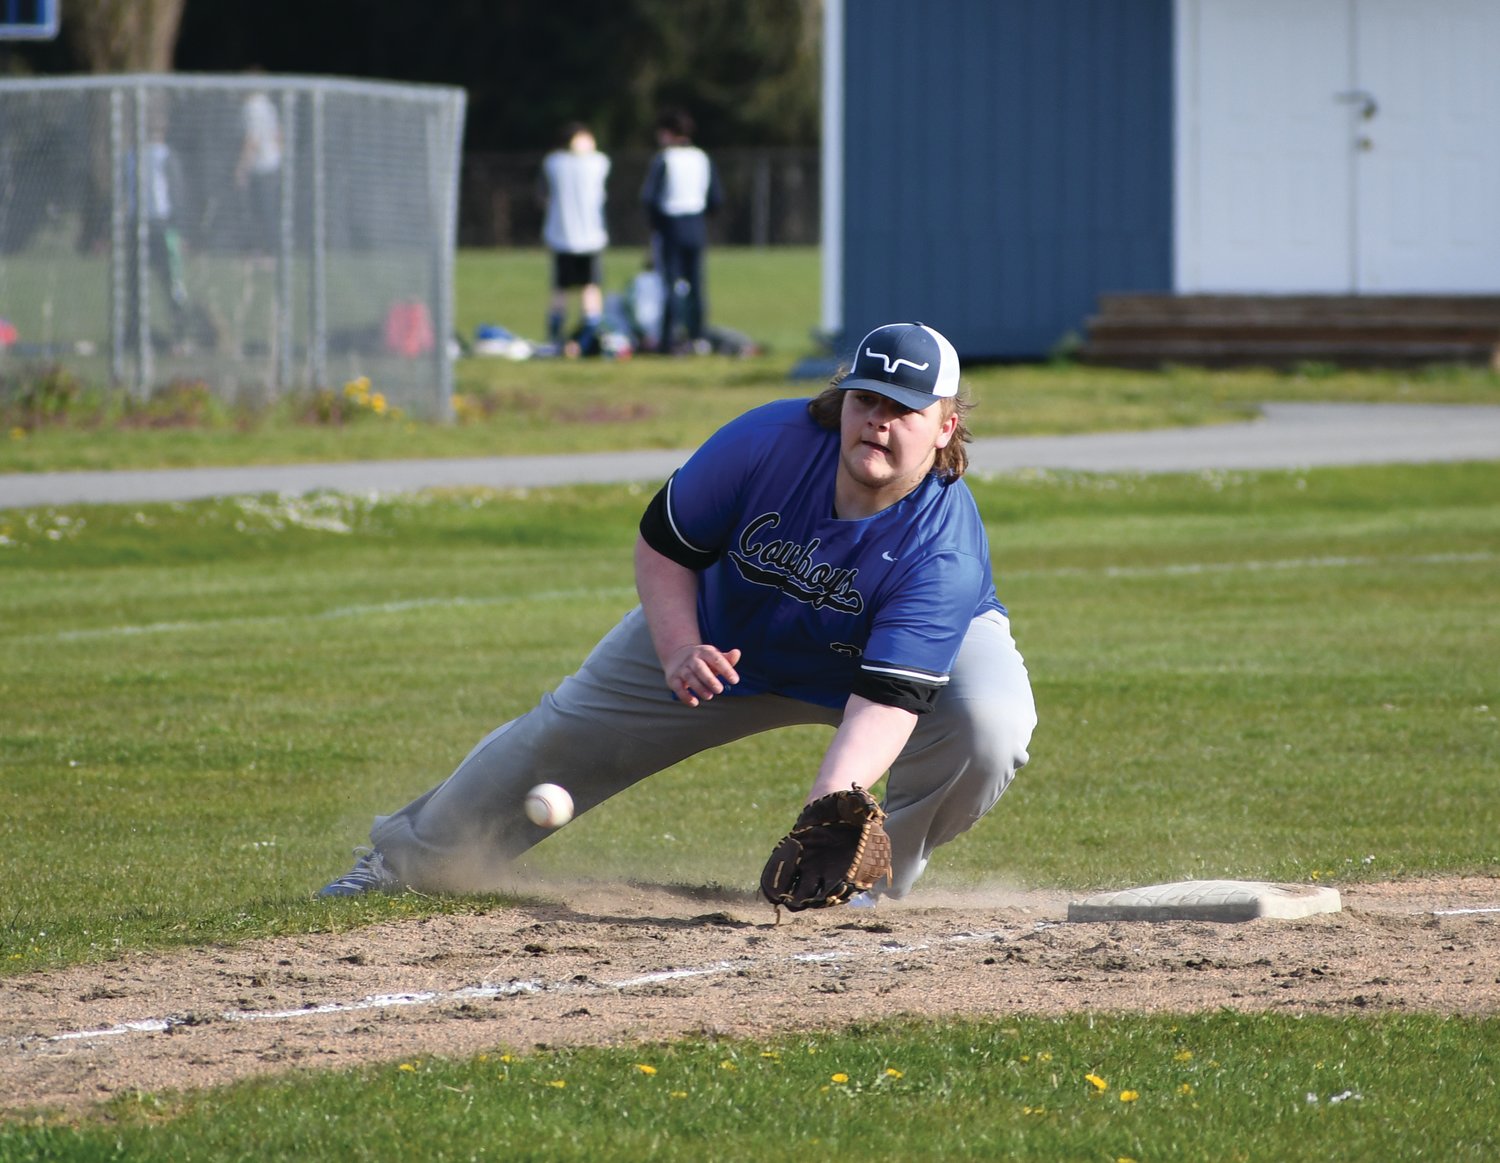 Third baseman Chris Fair collects a ball traveling down the foul line. Leader photo by James Sloan